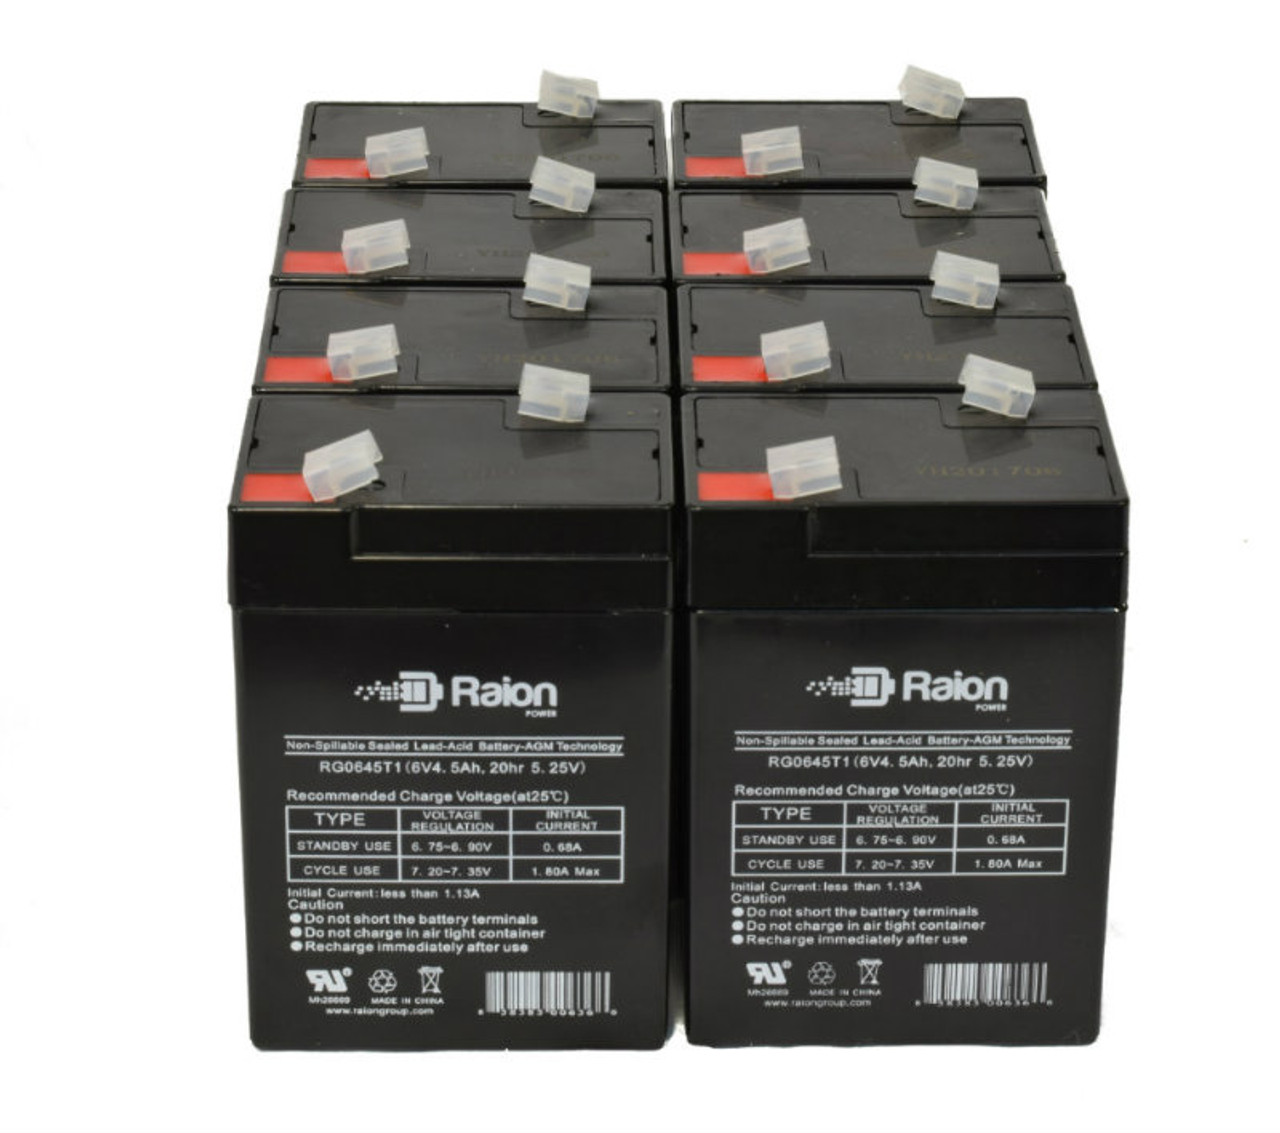 Raion Power 6V 4.5Ah Replacement Emergency Light Battery for Detex ECL230MO - 8 Pack